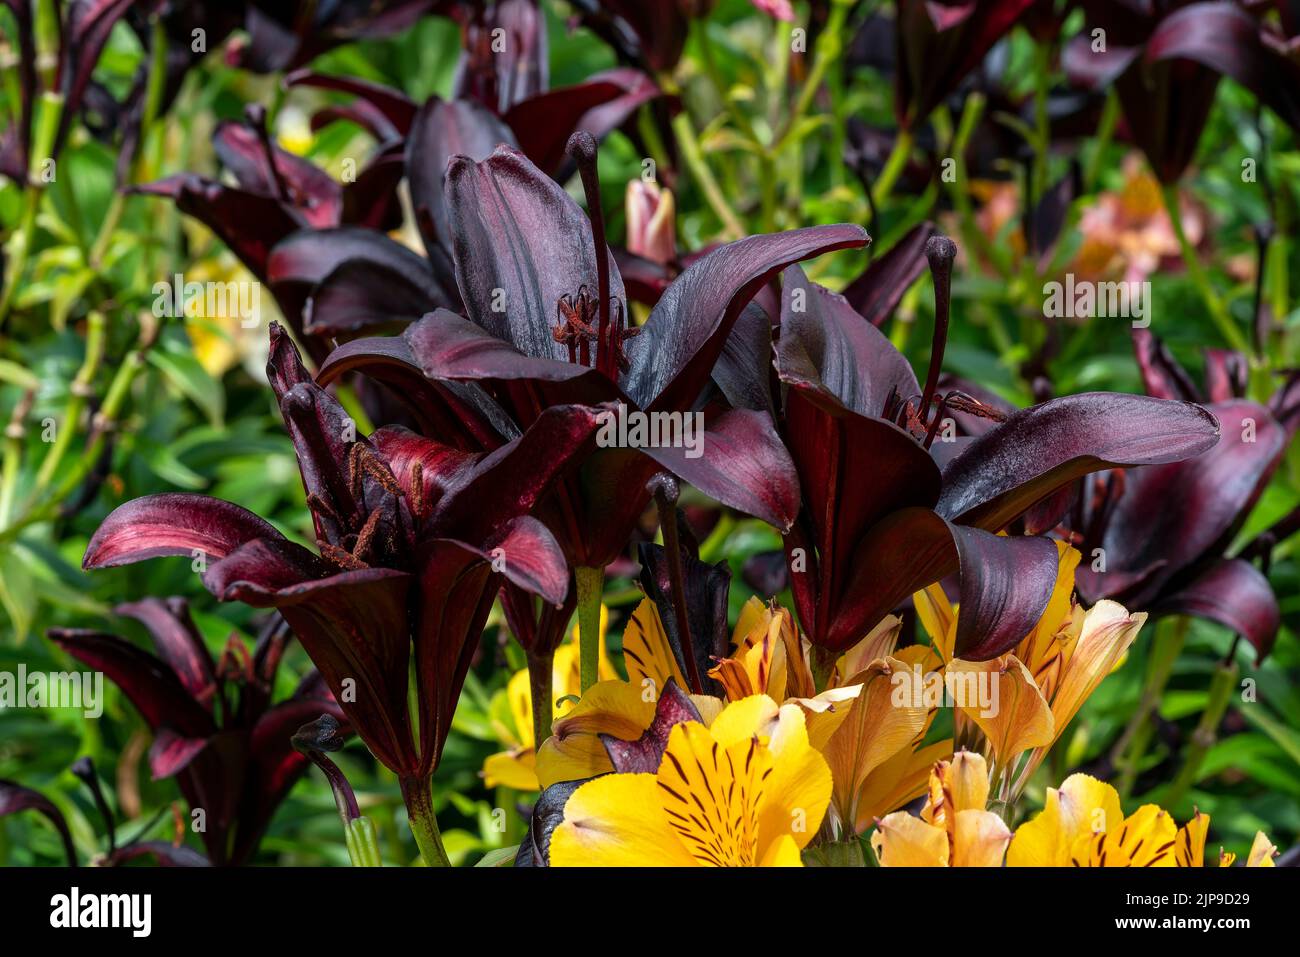 Asiatic lily 'Night Rider' a summer flowering bulb plant with a deep black purple summertime flower, stock photo image Stock Photo